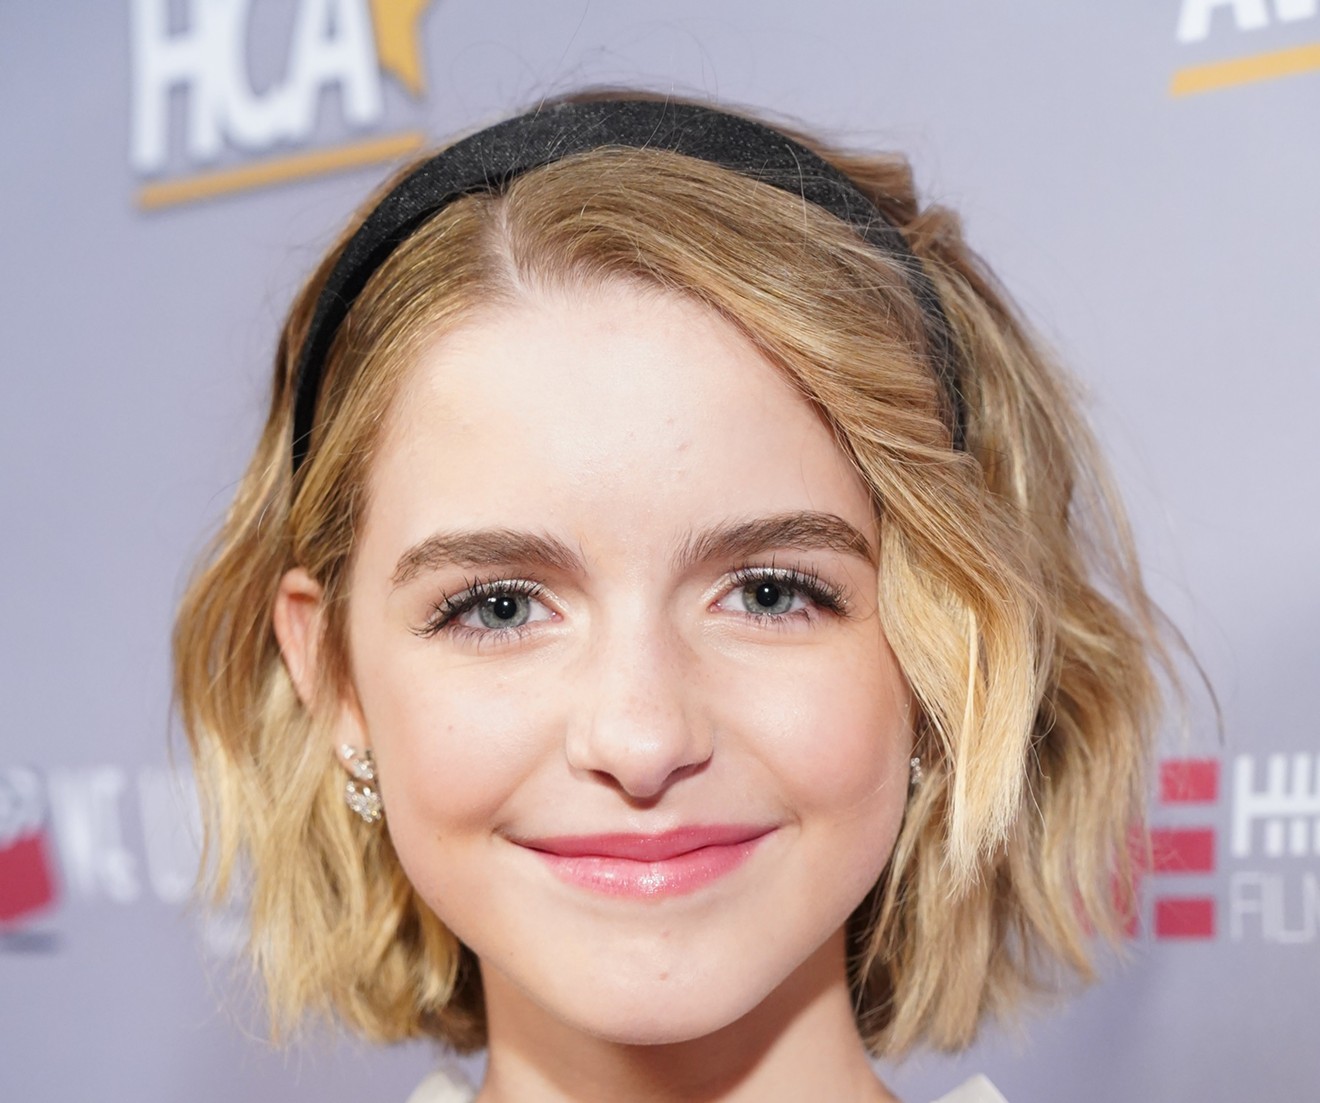 After a string of roles in successful films and series such as The Handmaid’s Tale and The Chilling Adventures of Sabrina, Grapevine's McKenna Grace is battling spirits in Ghostbusters: Afterlife.